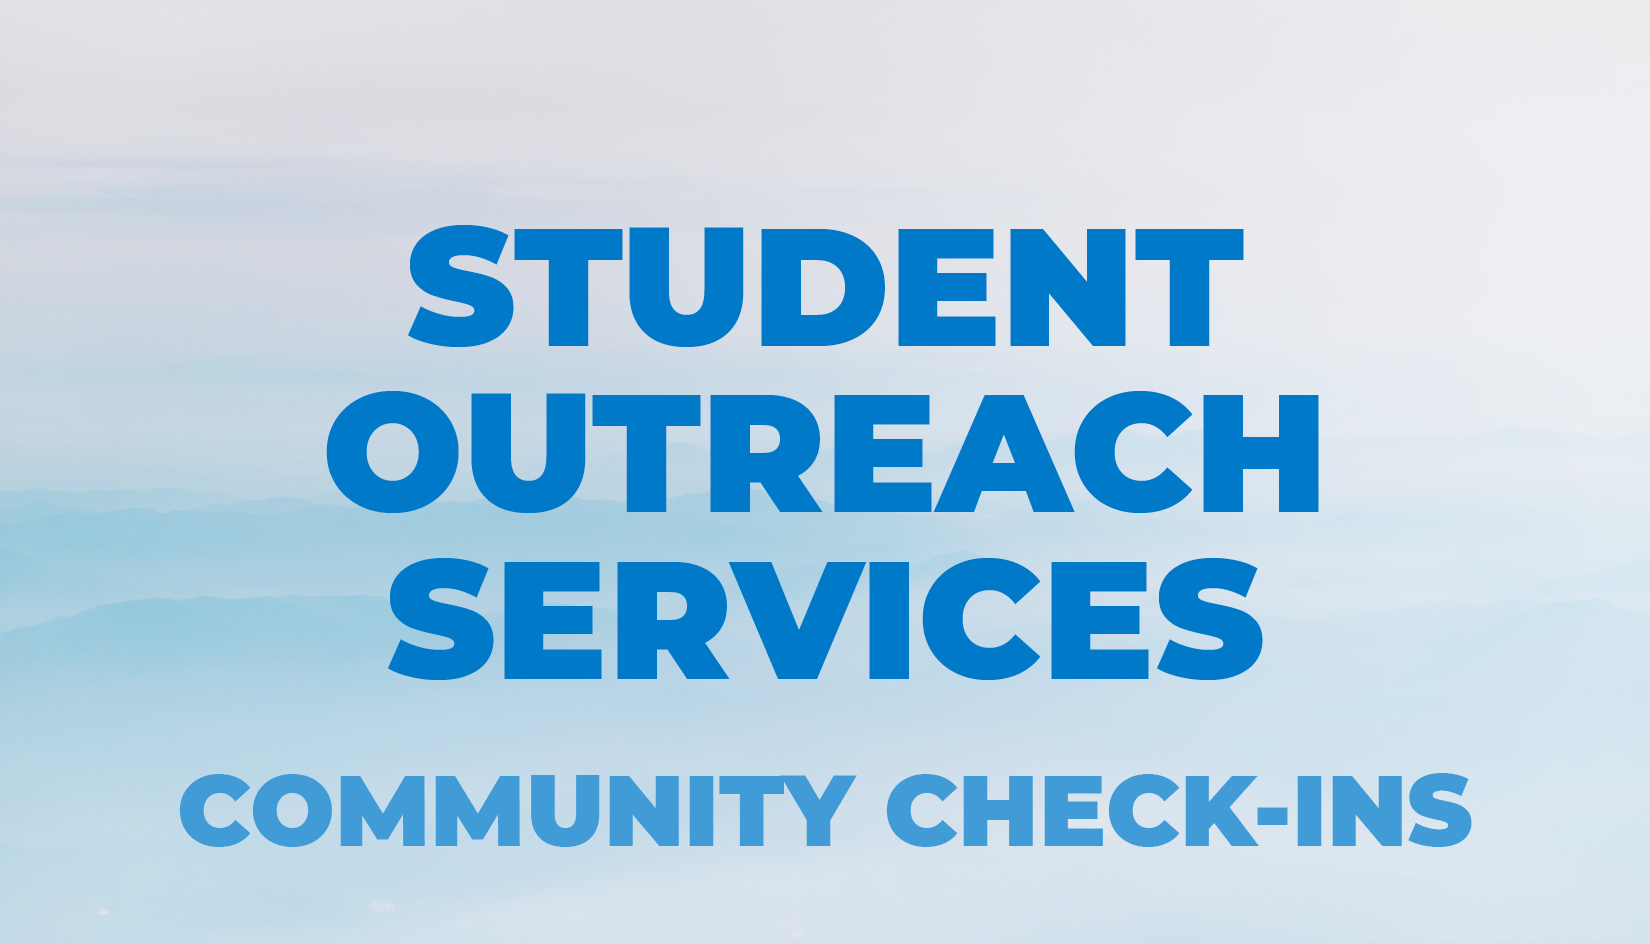 Student Outreach Services Community Check-ins in large, bold, blue lettering over a blue abstract cloud background